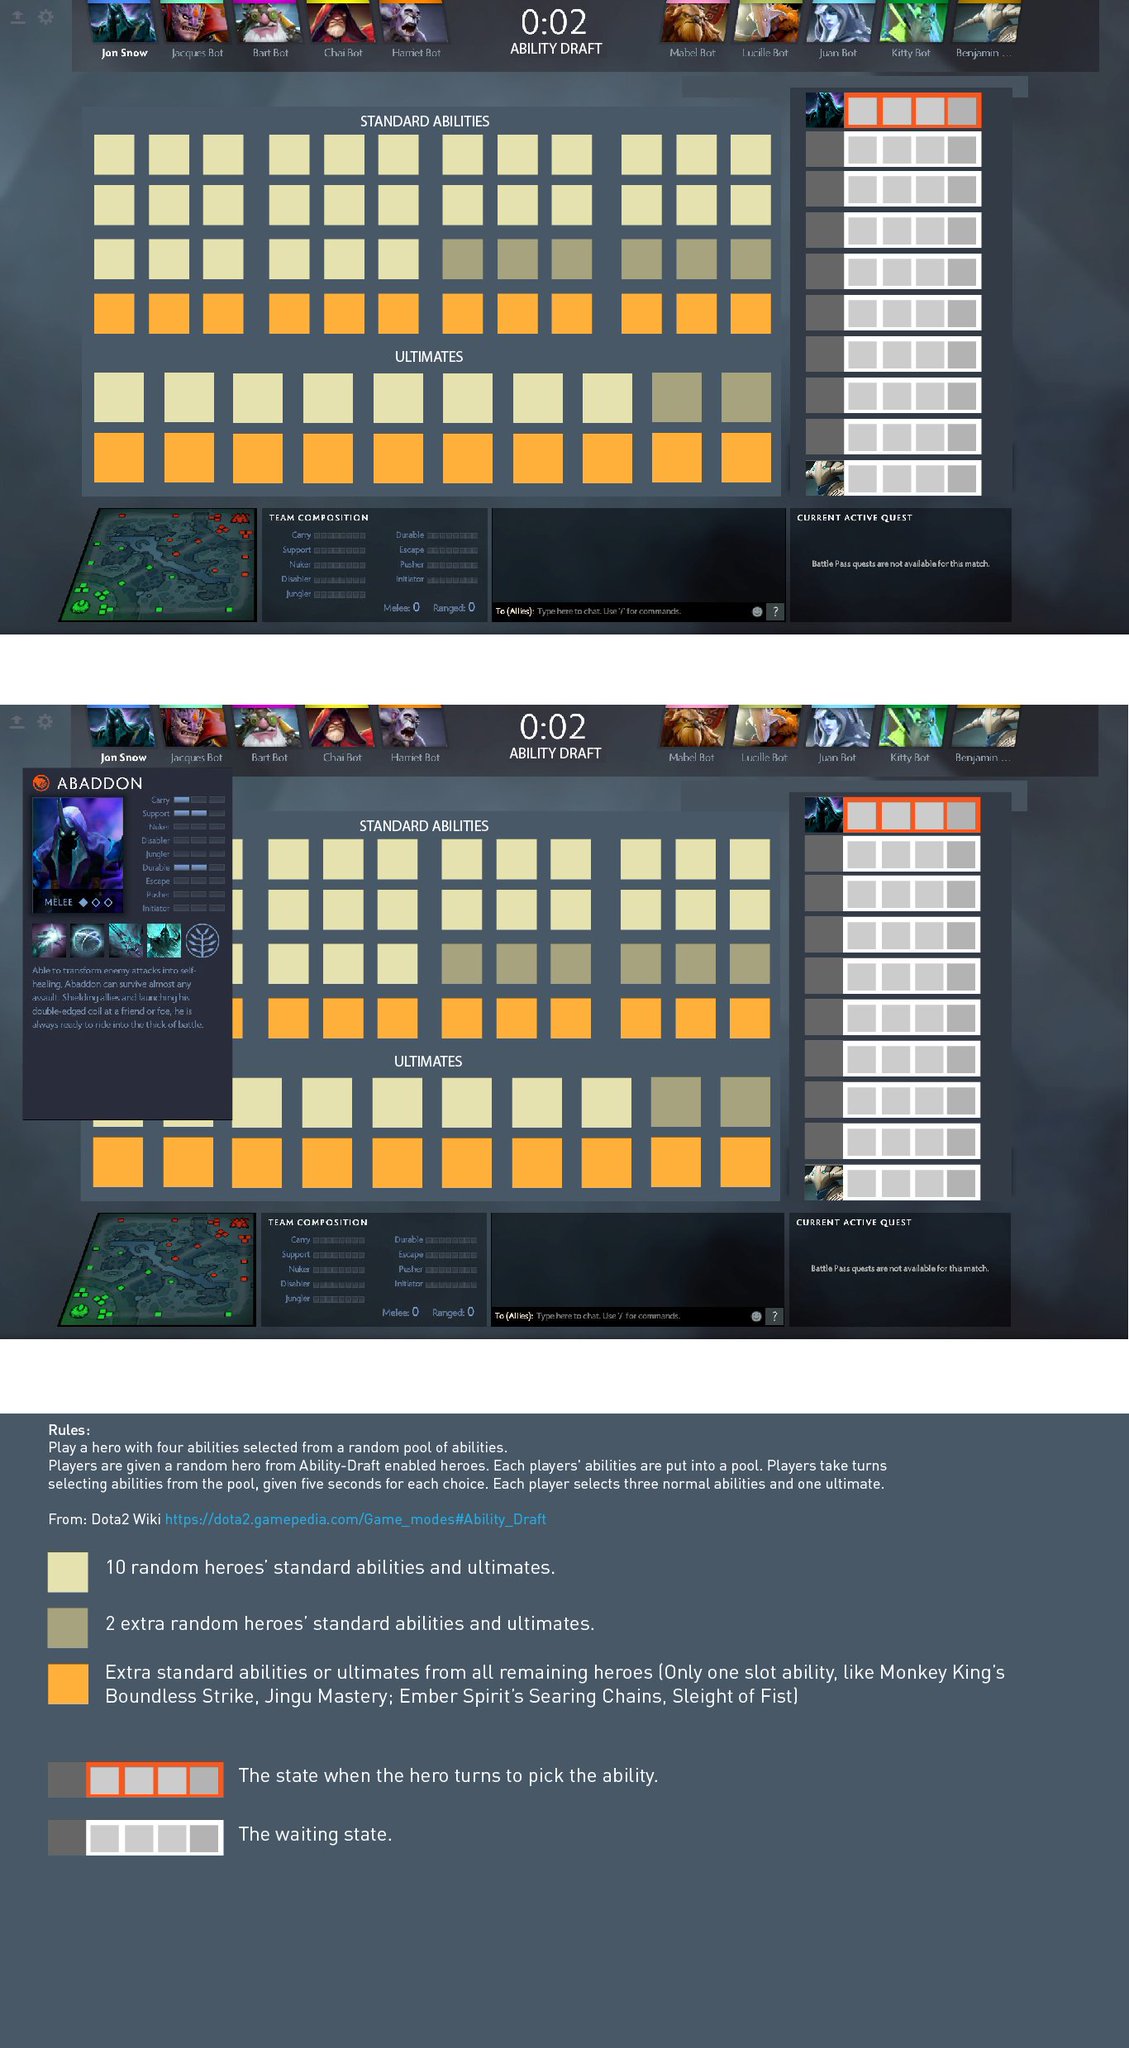 Reddit Dota 2 On Twitter I Made A New Ability Draft Omg Layout